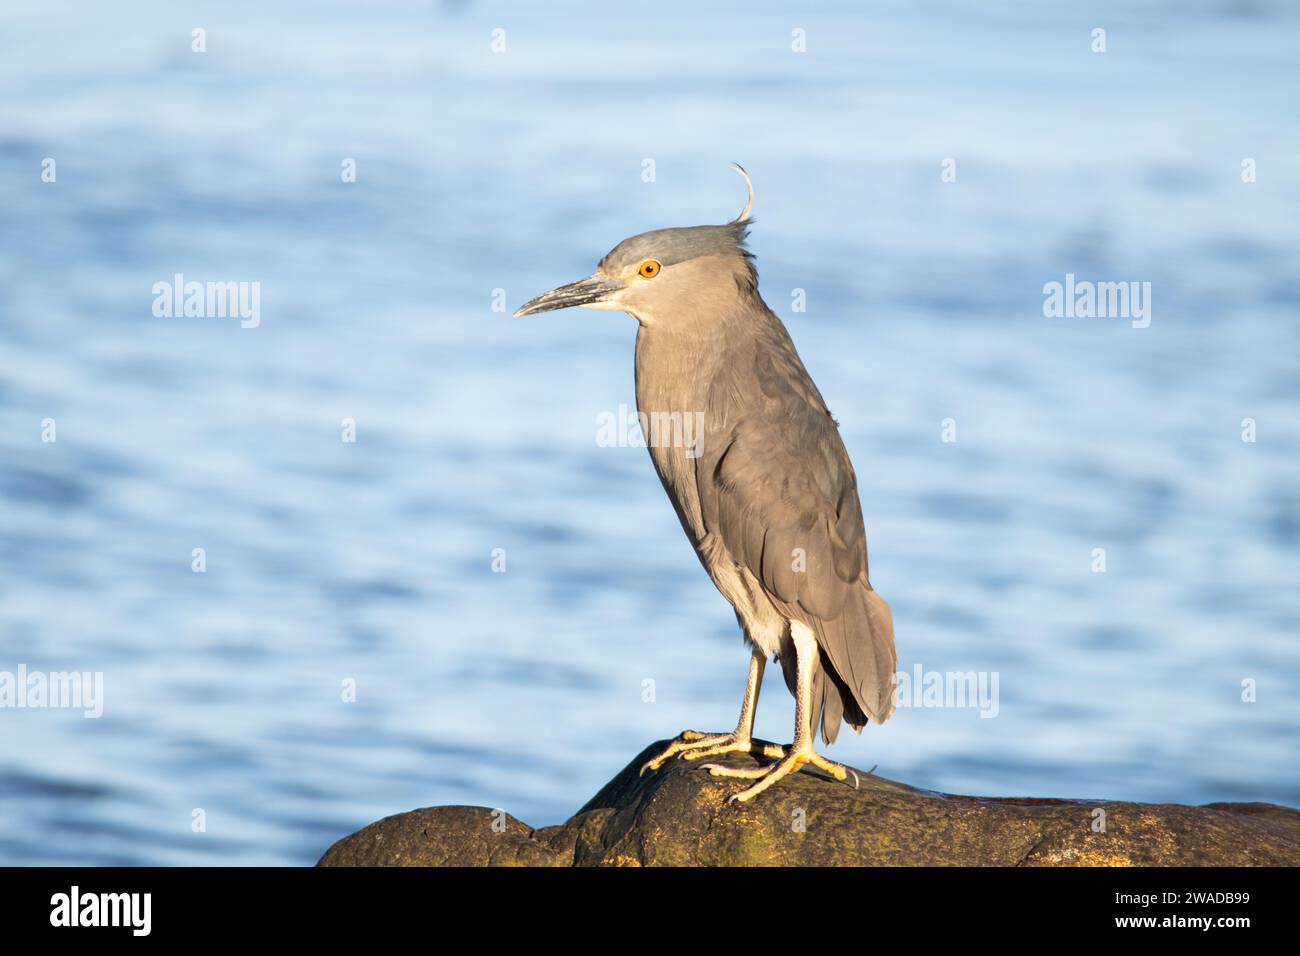 Black-crowned night heron standing on a rock next to the ocean Stock Photo